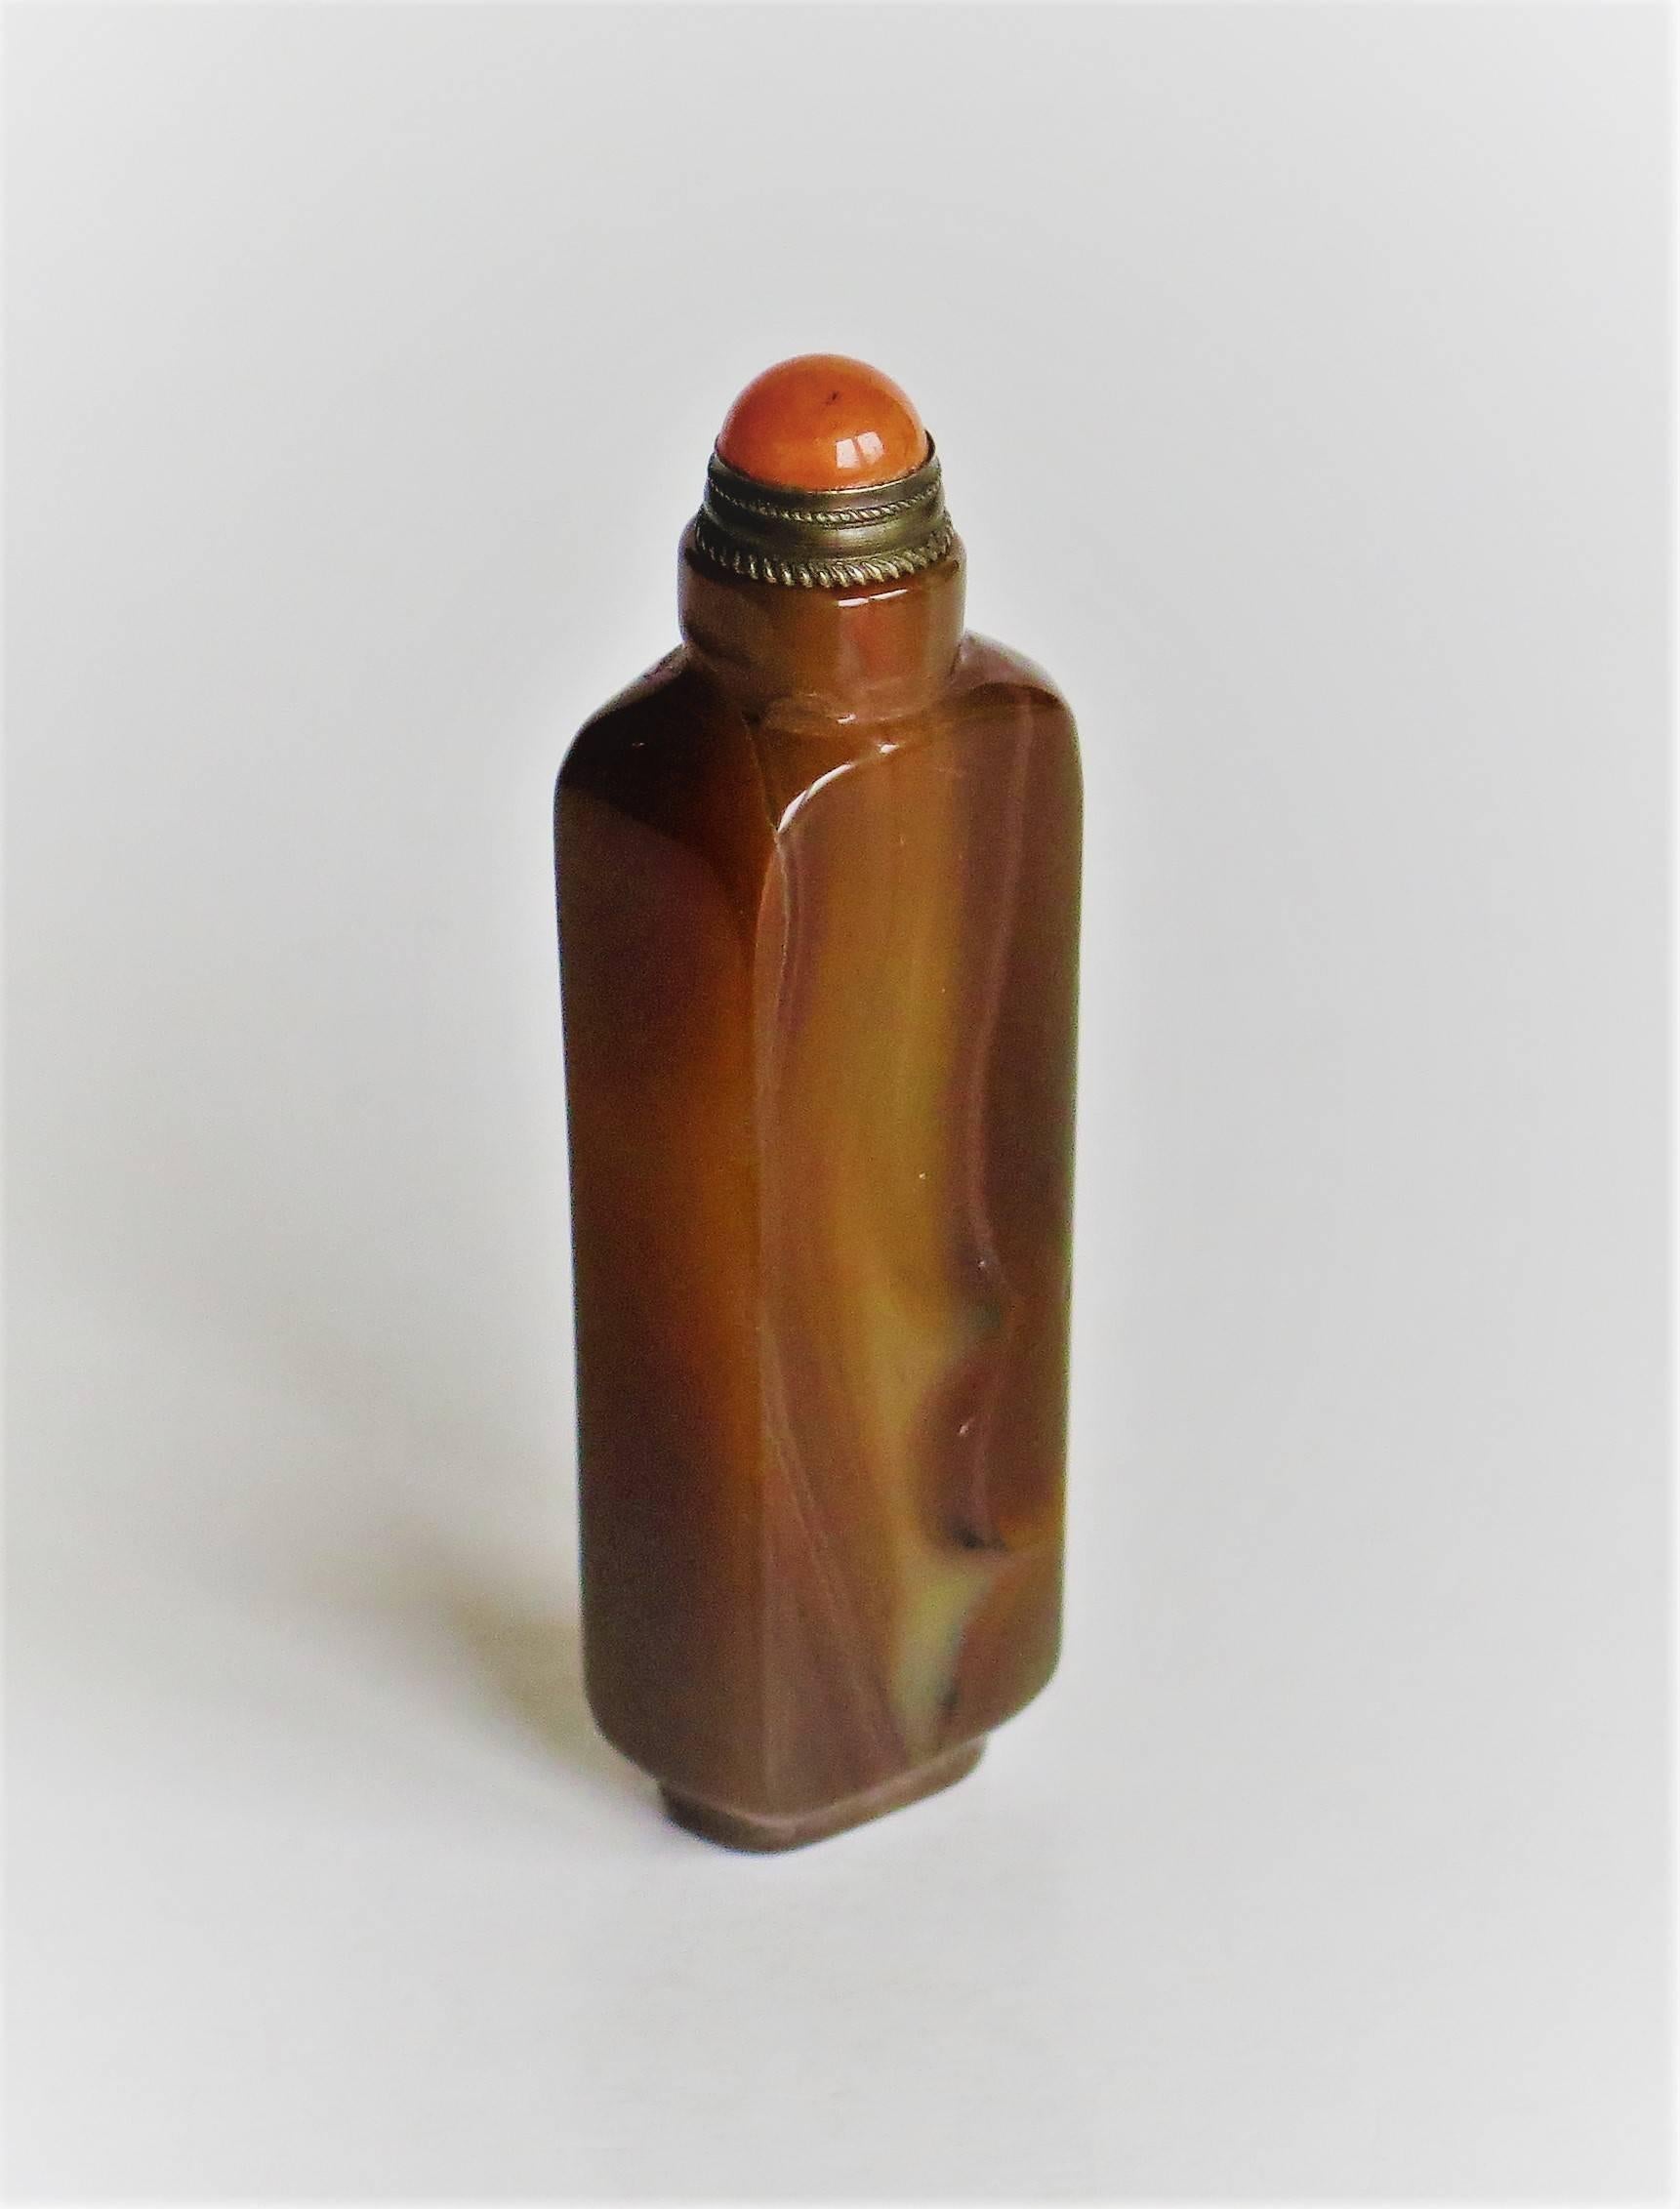 20th Century Chinese Snuff Bottle, Natural Jade, Orange Stone Stopper and Spoon, circa 1930